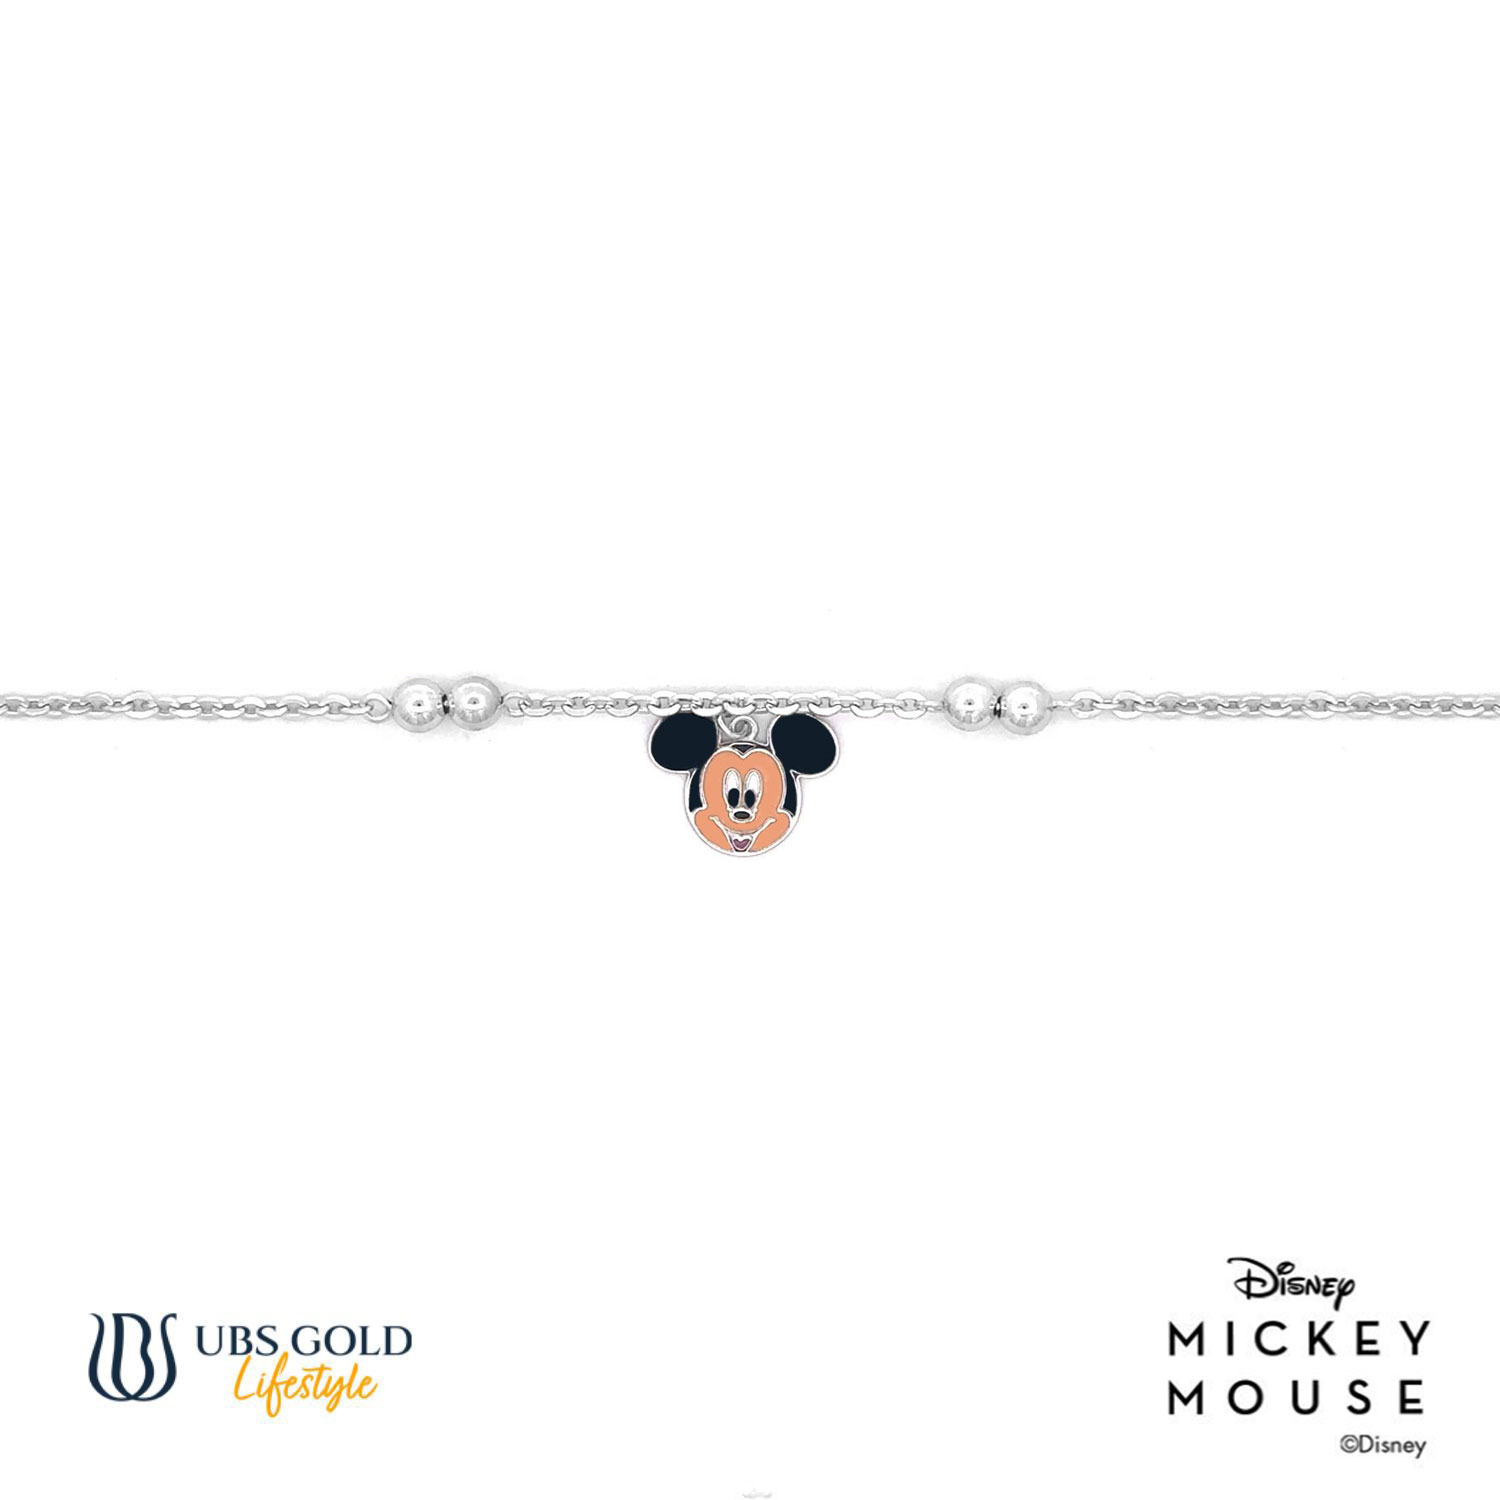 UBS Gelang Emas Anak Disney Mickey Mouse - Hgy0116 - 17K